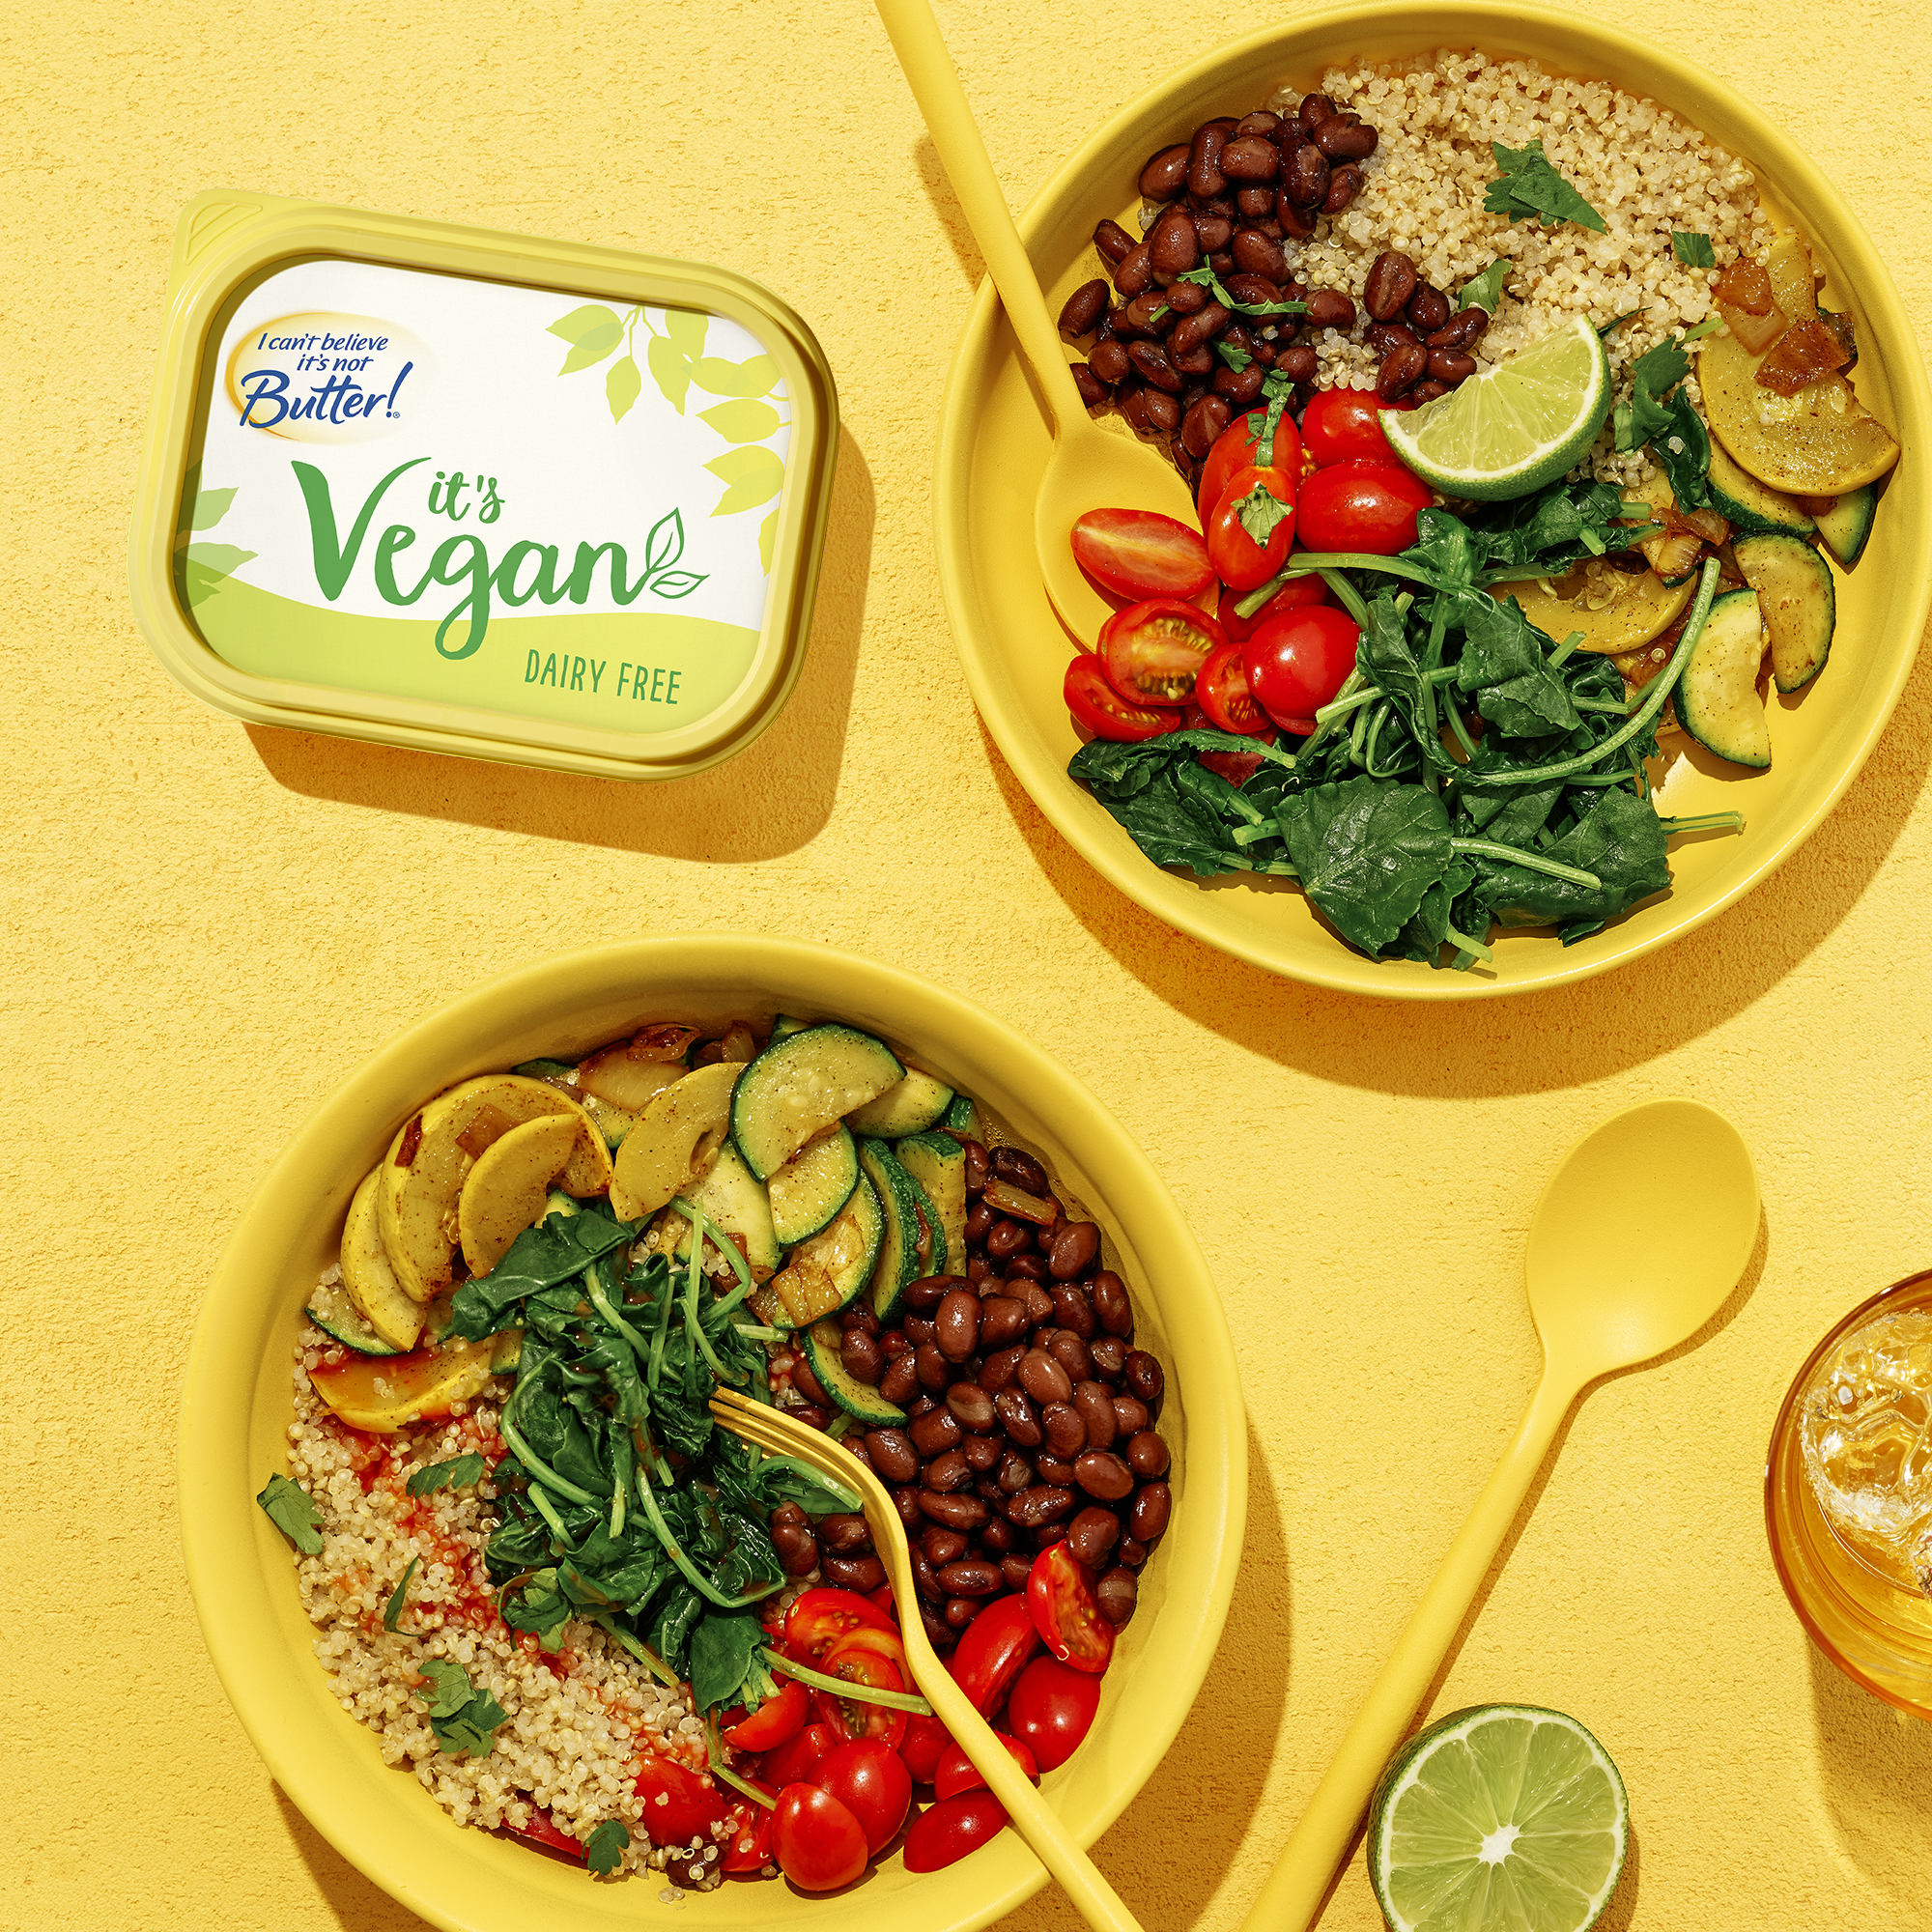 I Can’t Believe It’s Not Butter! Vegan Spread, 15 oz Tub (Refrigerated) - image 5 of 11